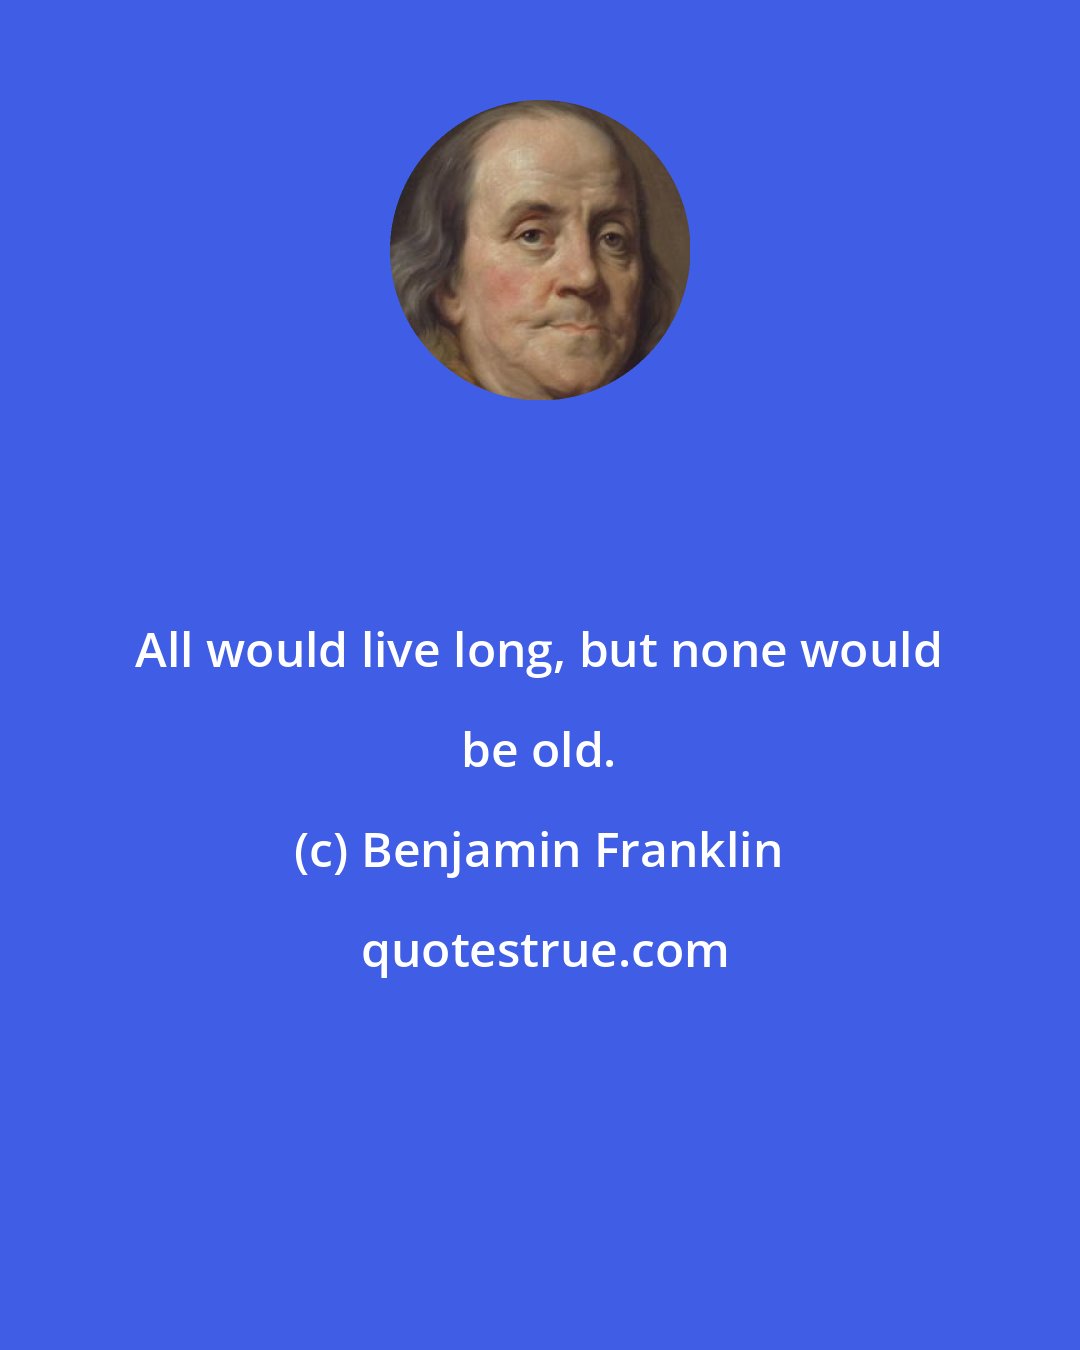 Benjamin Franklin: All would live long, but none would be old.